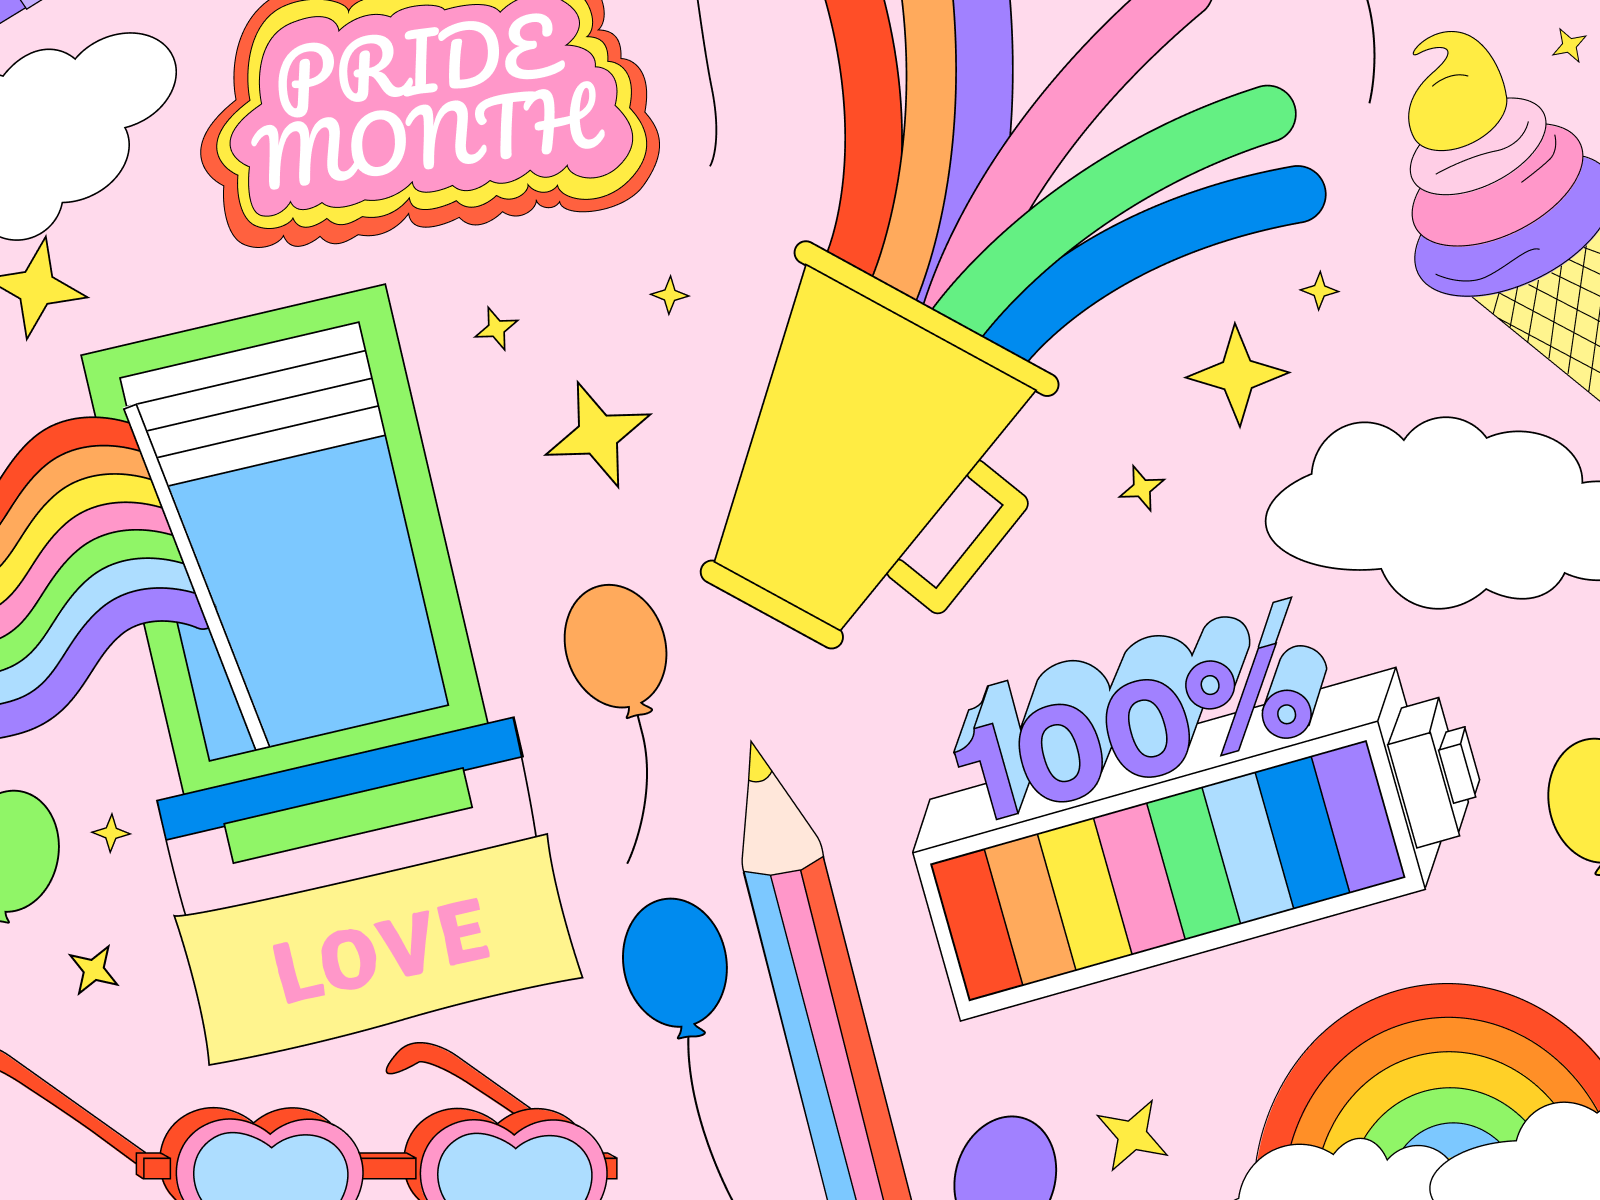 Prepare for Pride with Stickers free freebies illustration illustration design illustrations illustrations／ui illustrator system ui ux